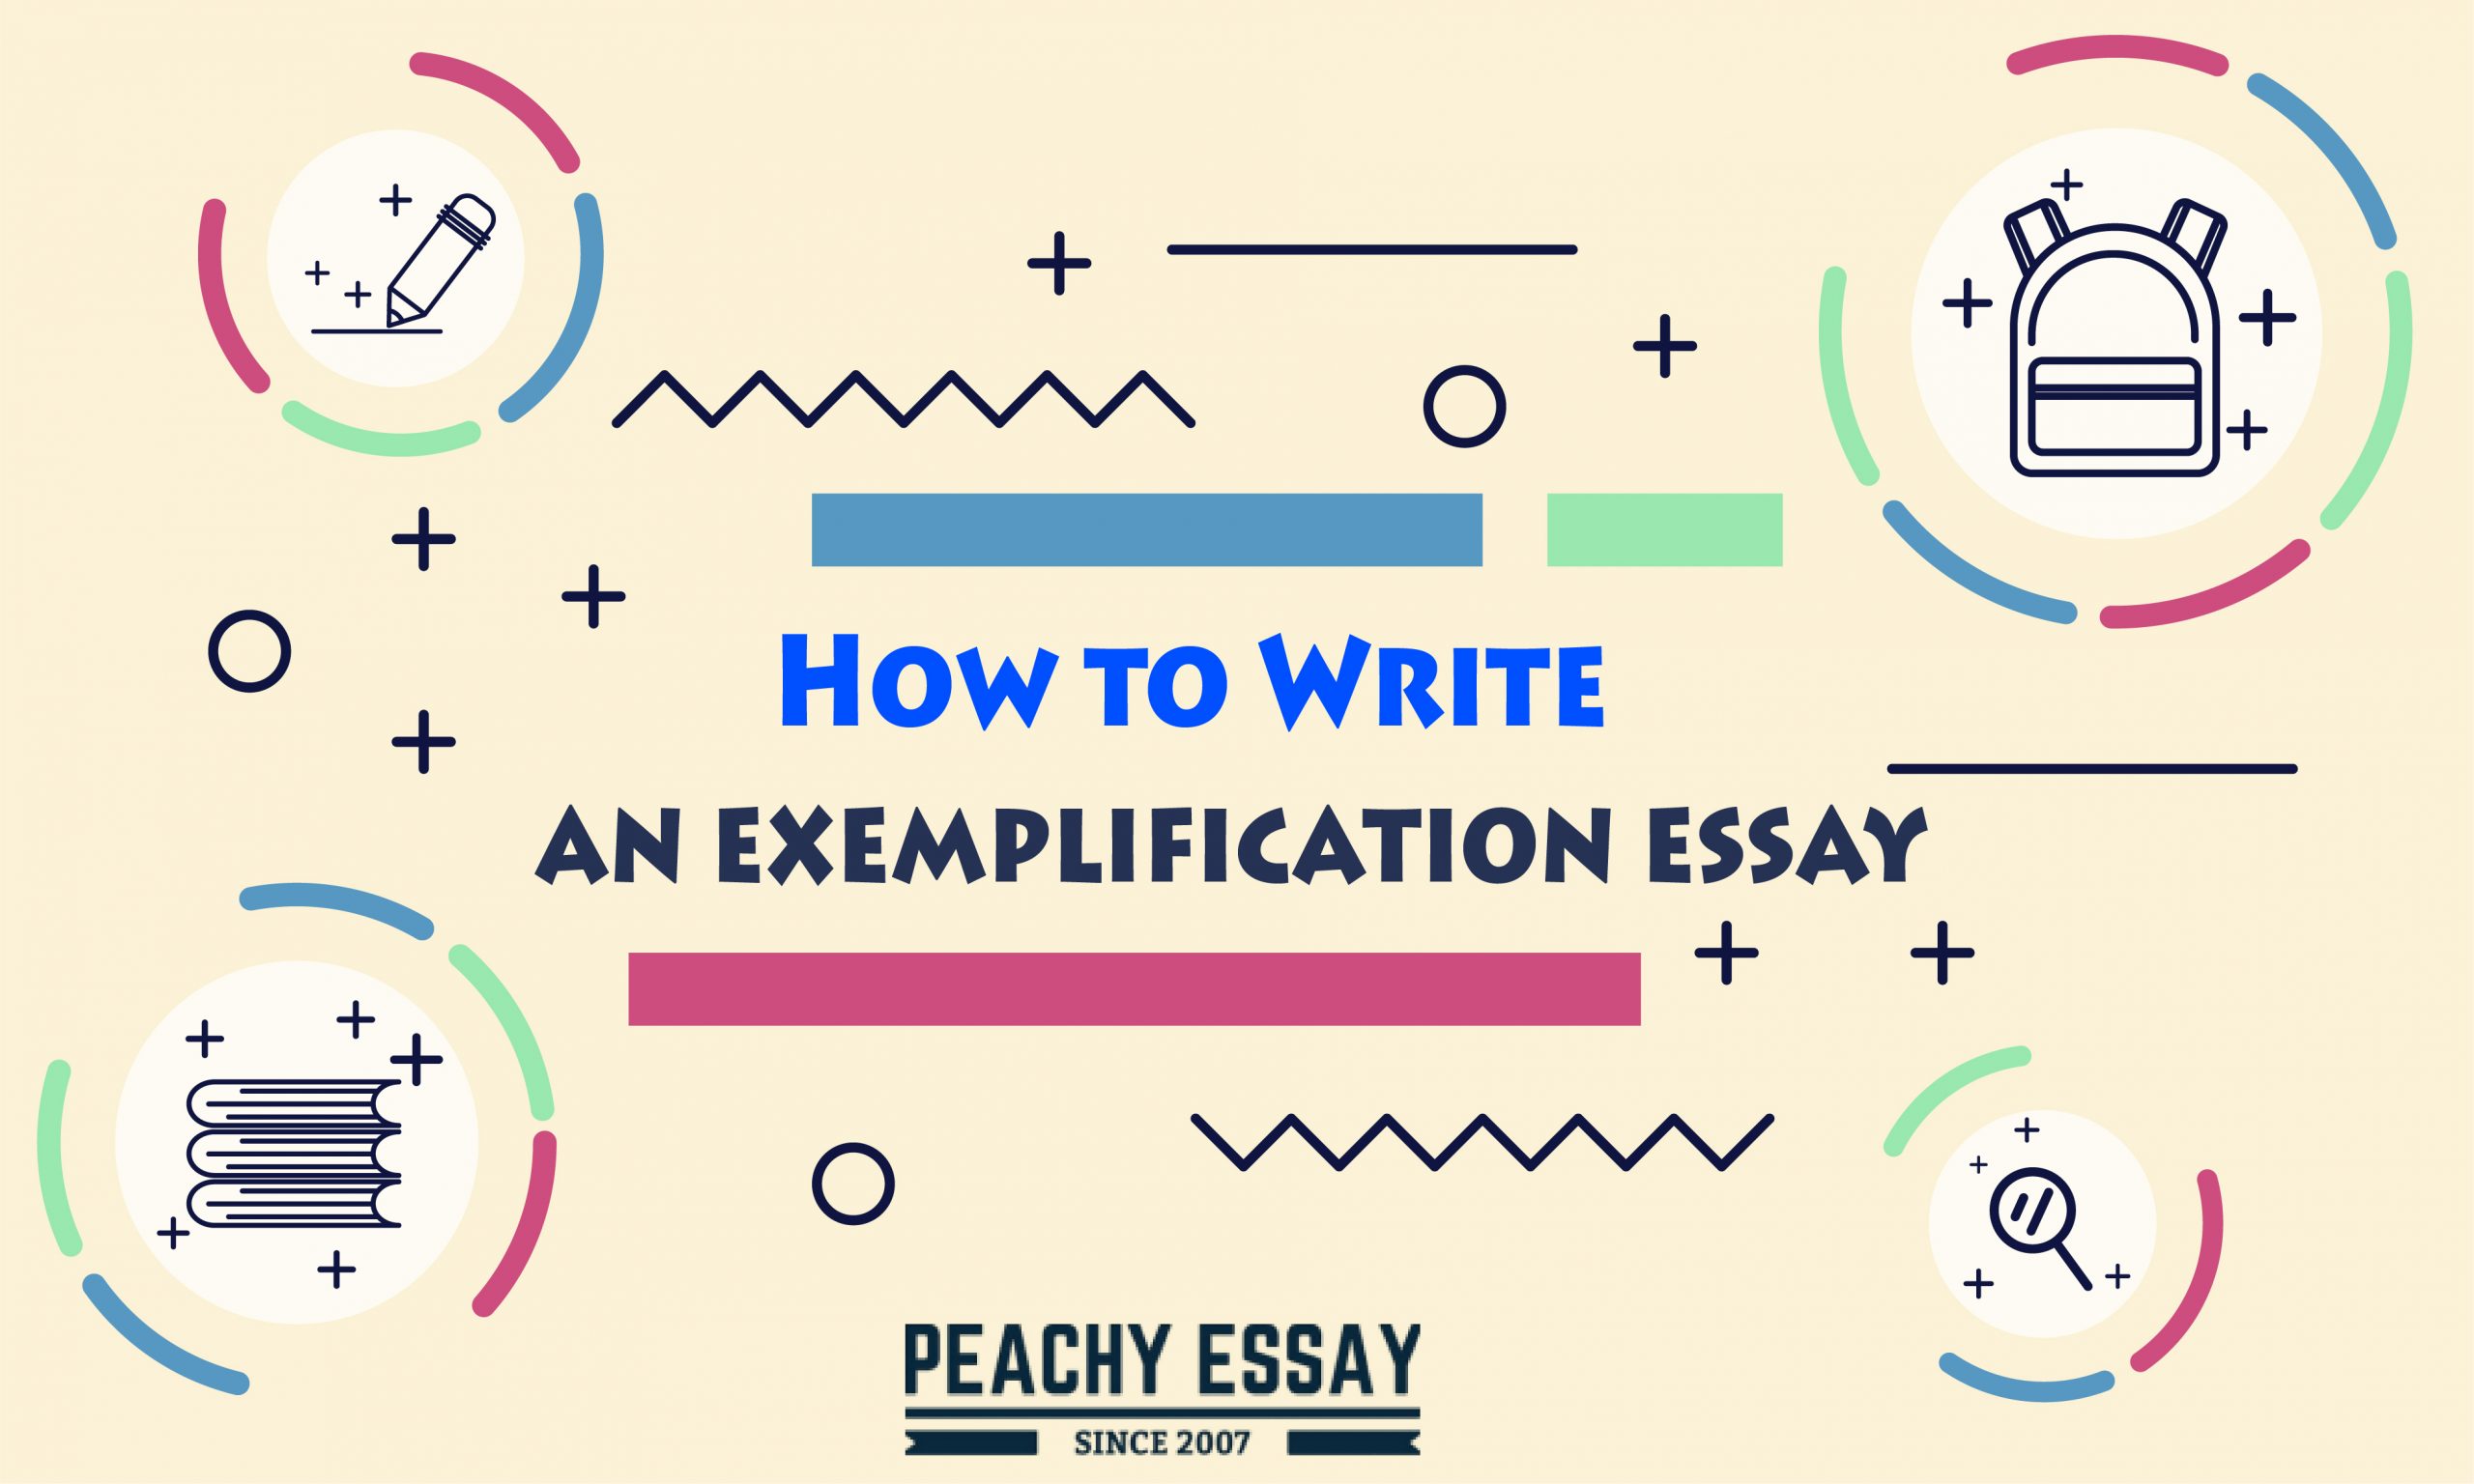 exemplification essays might incorporate which of the following